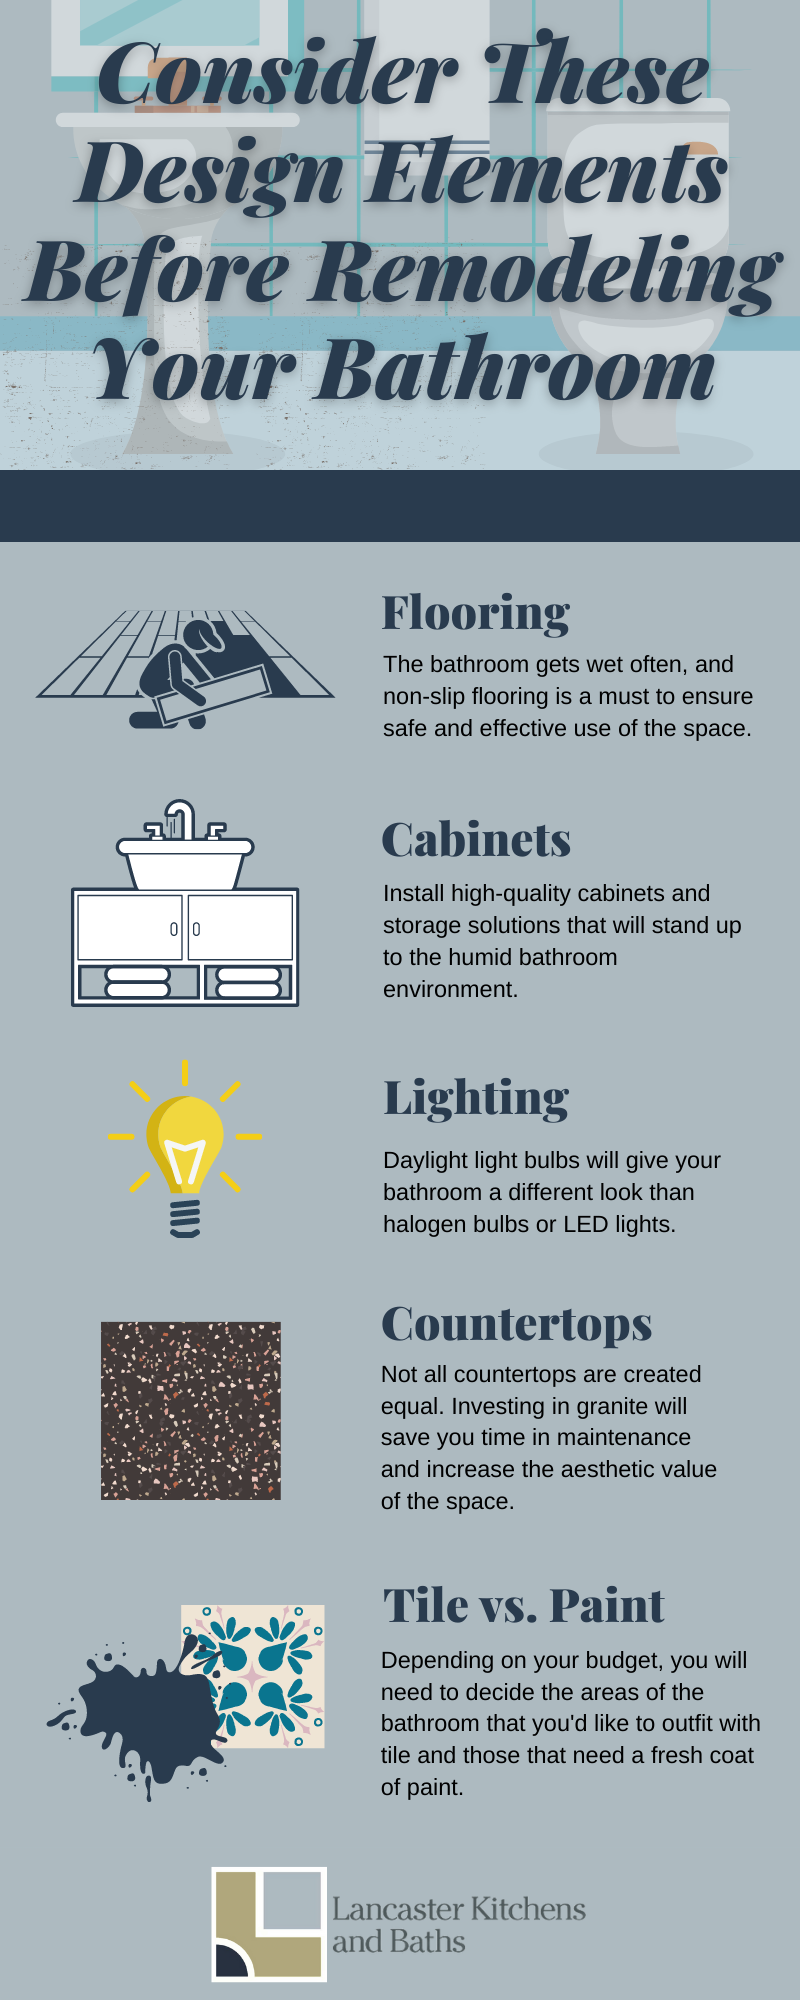 An infographic showing five key design elements one needs to consider before remodeling their bathroom